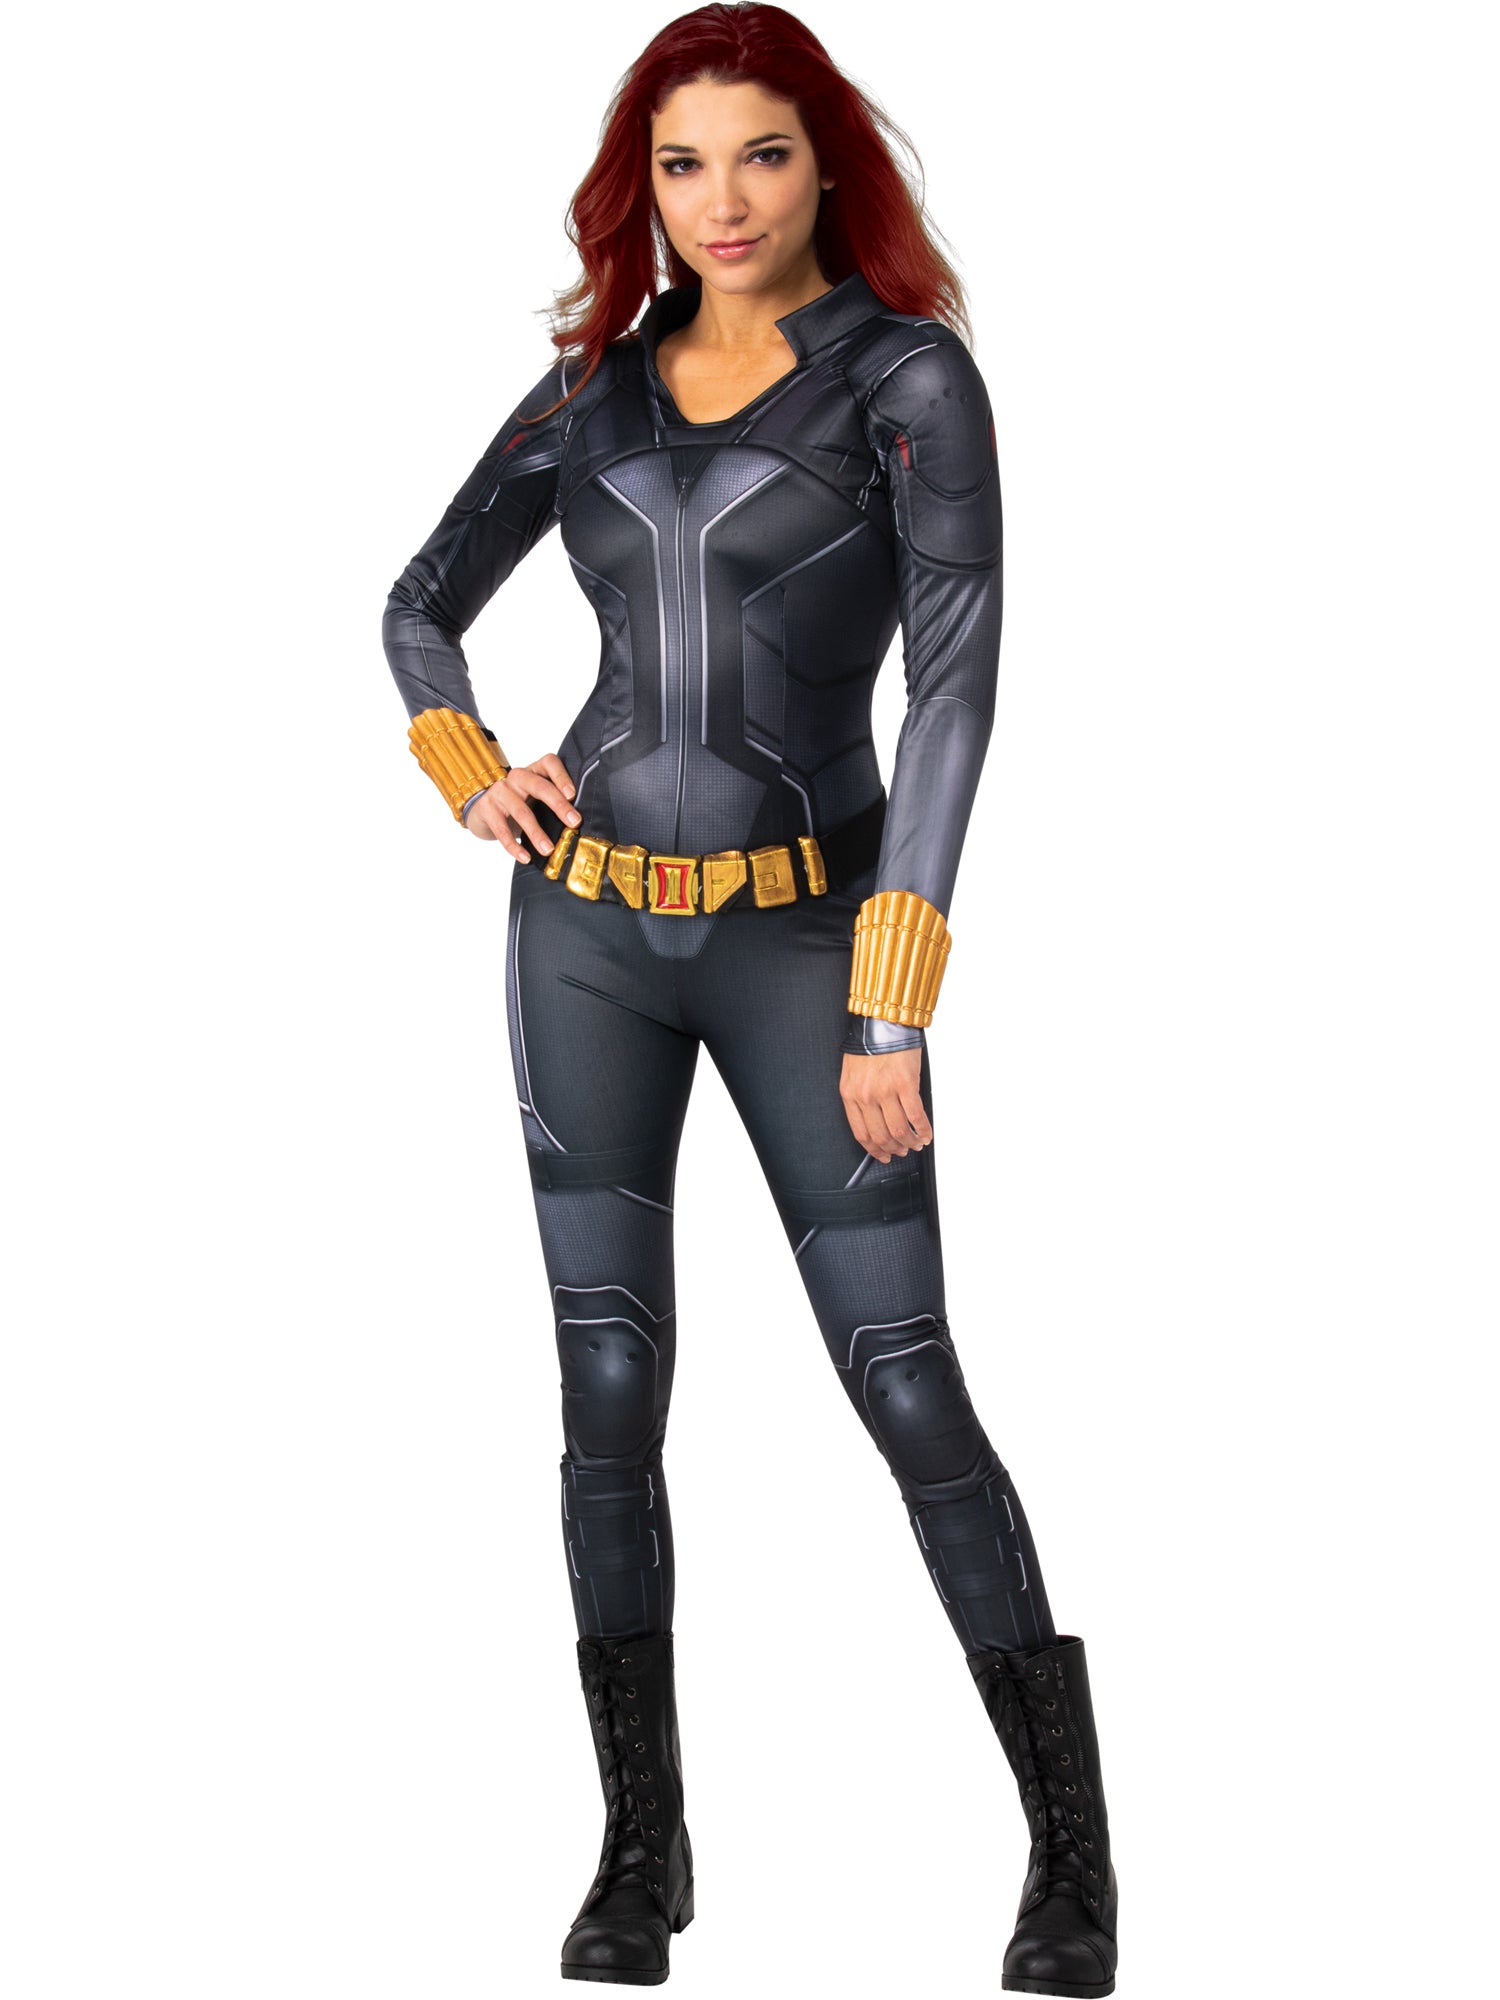 Black Widow, Black Widow, Avengers, Black Widow, Multi, Marvel, Adult Costume, Small, Front